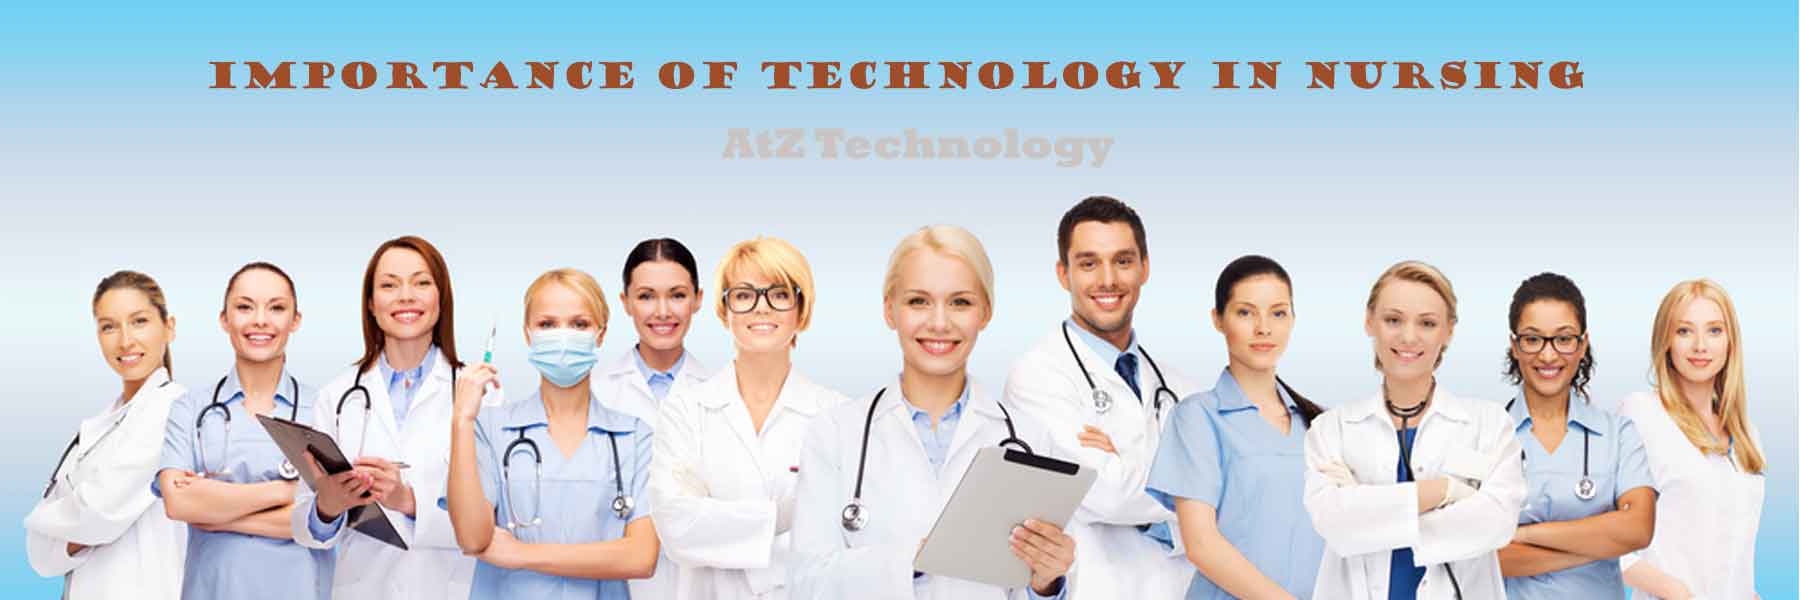 Importance of Technology in Nursing